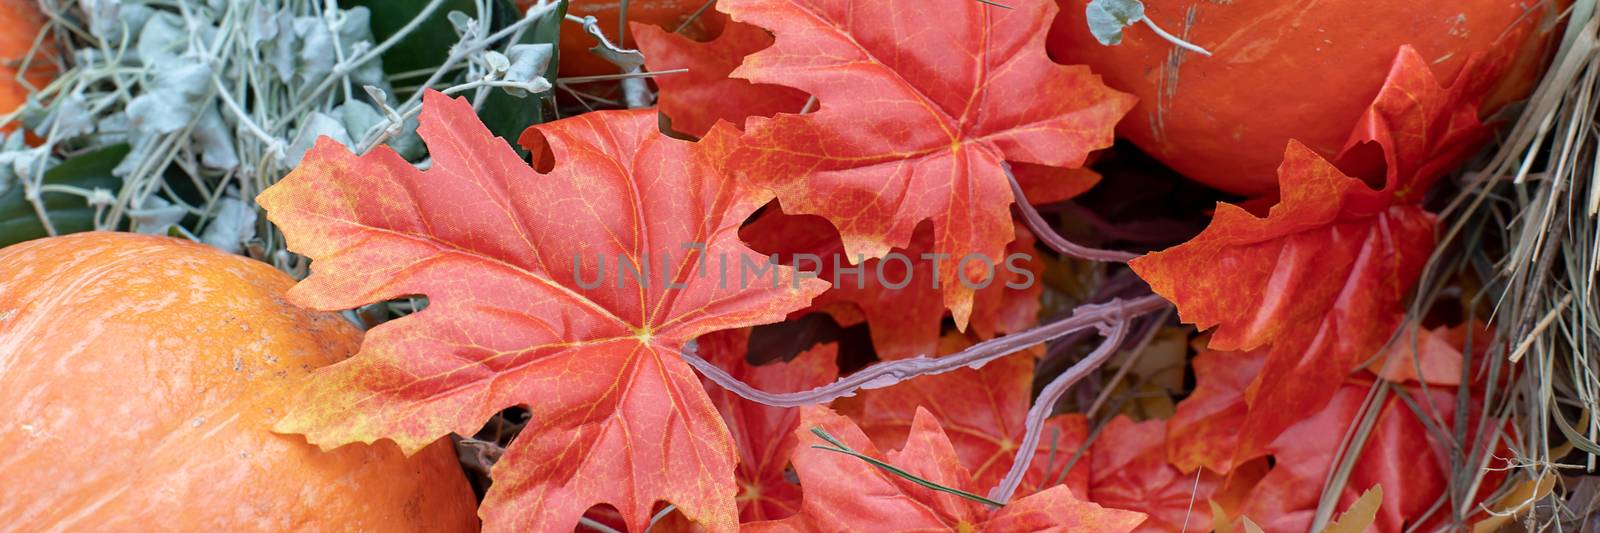 Happy Thanksgiving Day in Canada. Orange pumpkin and maple leaf background by bonilook